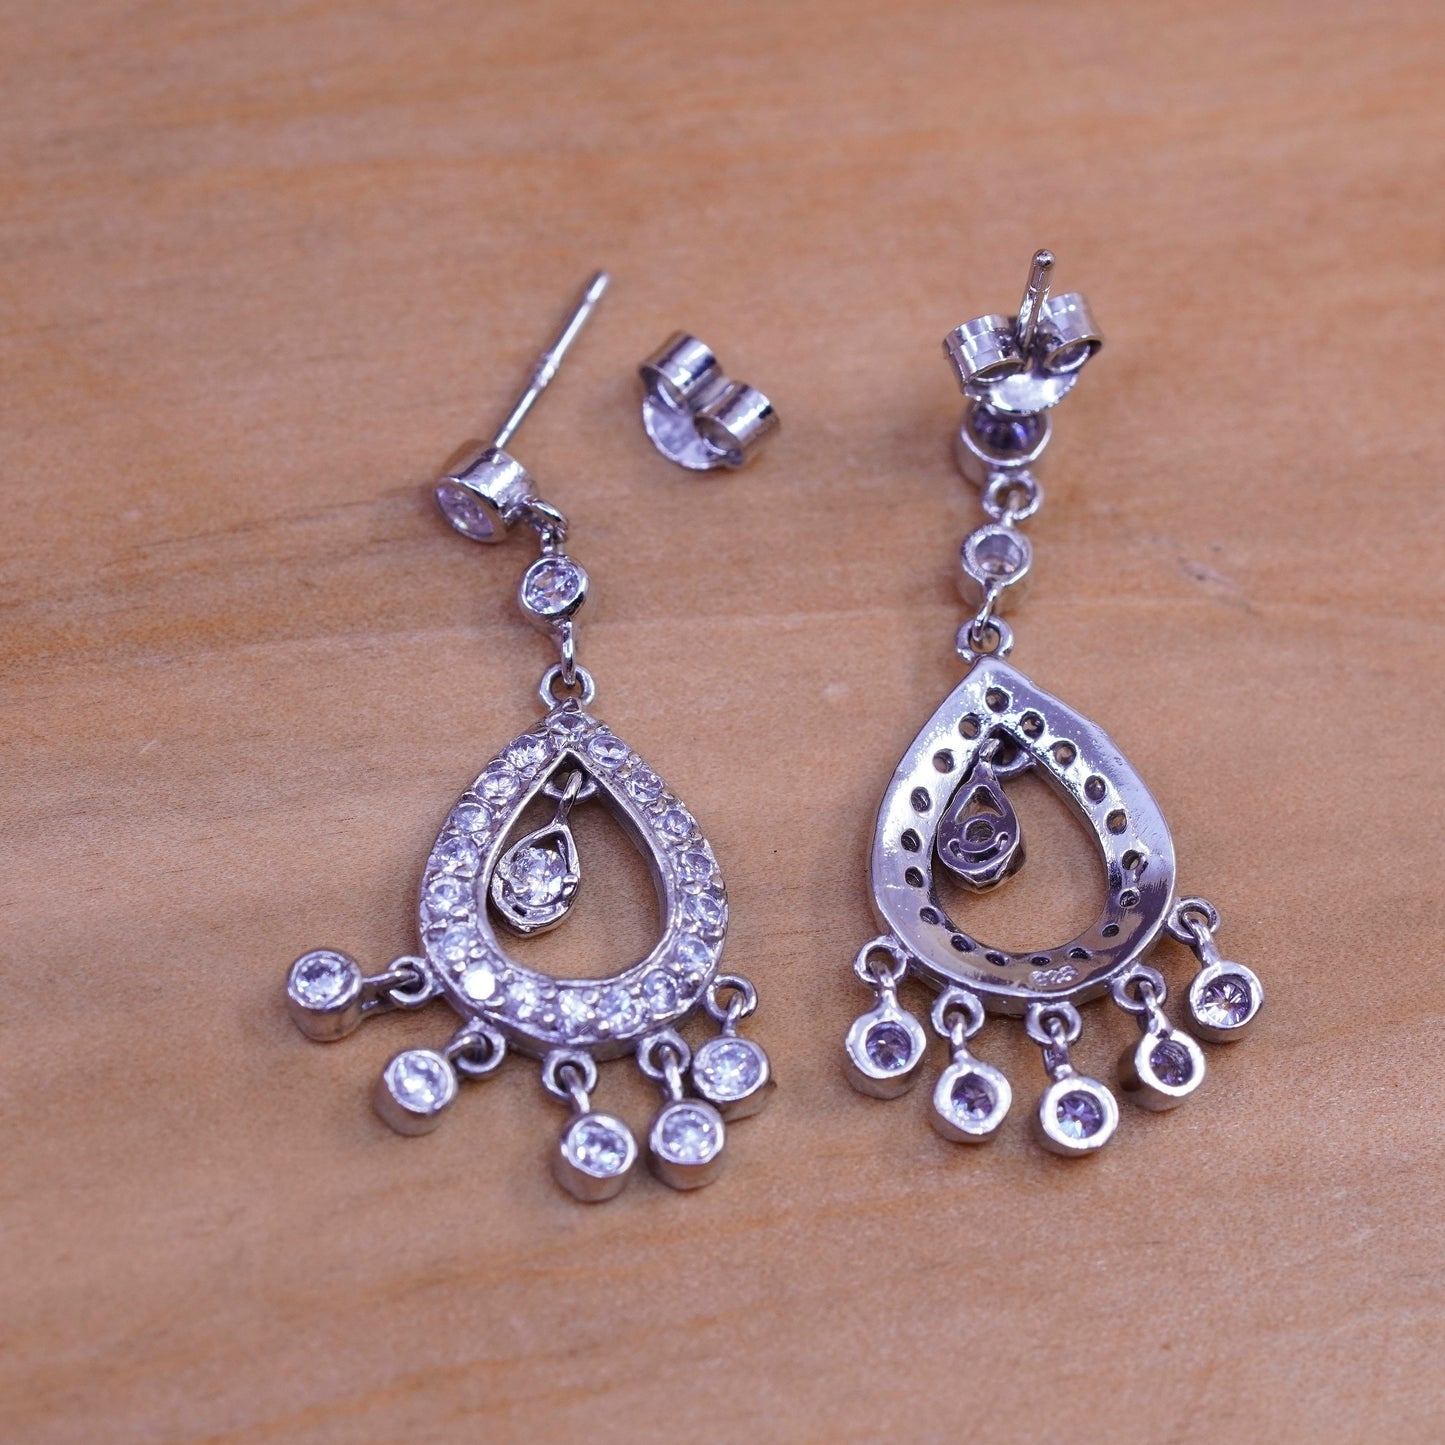 Vintage ATI Sterling silver earrings, 925 teardrops with cluster Cz Around